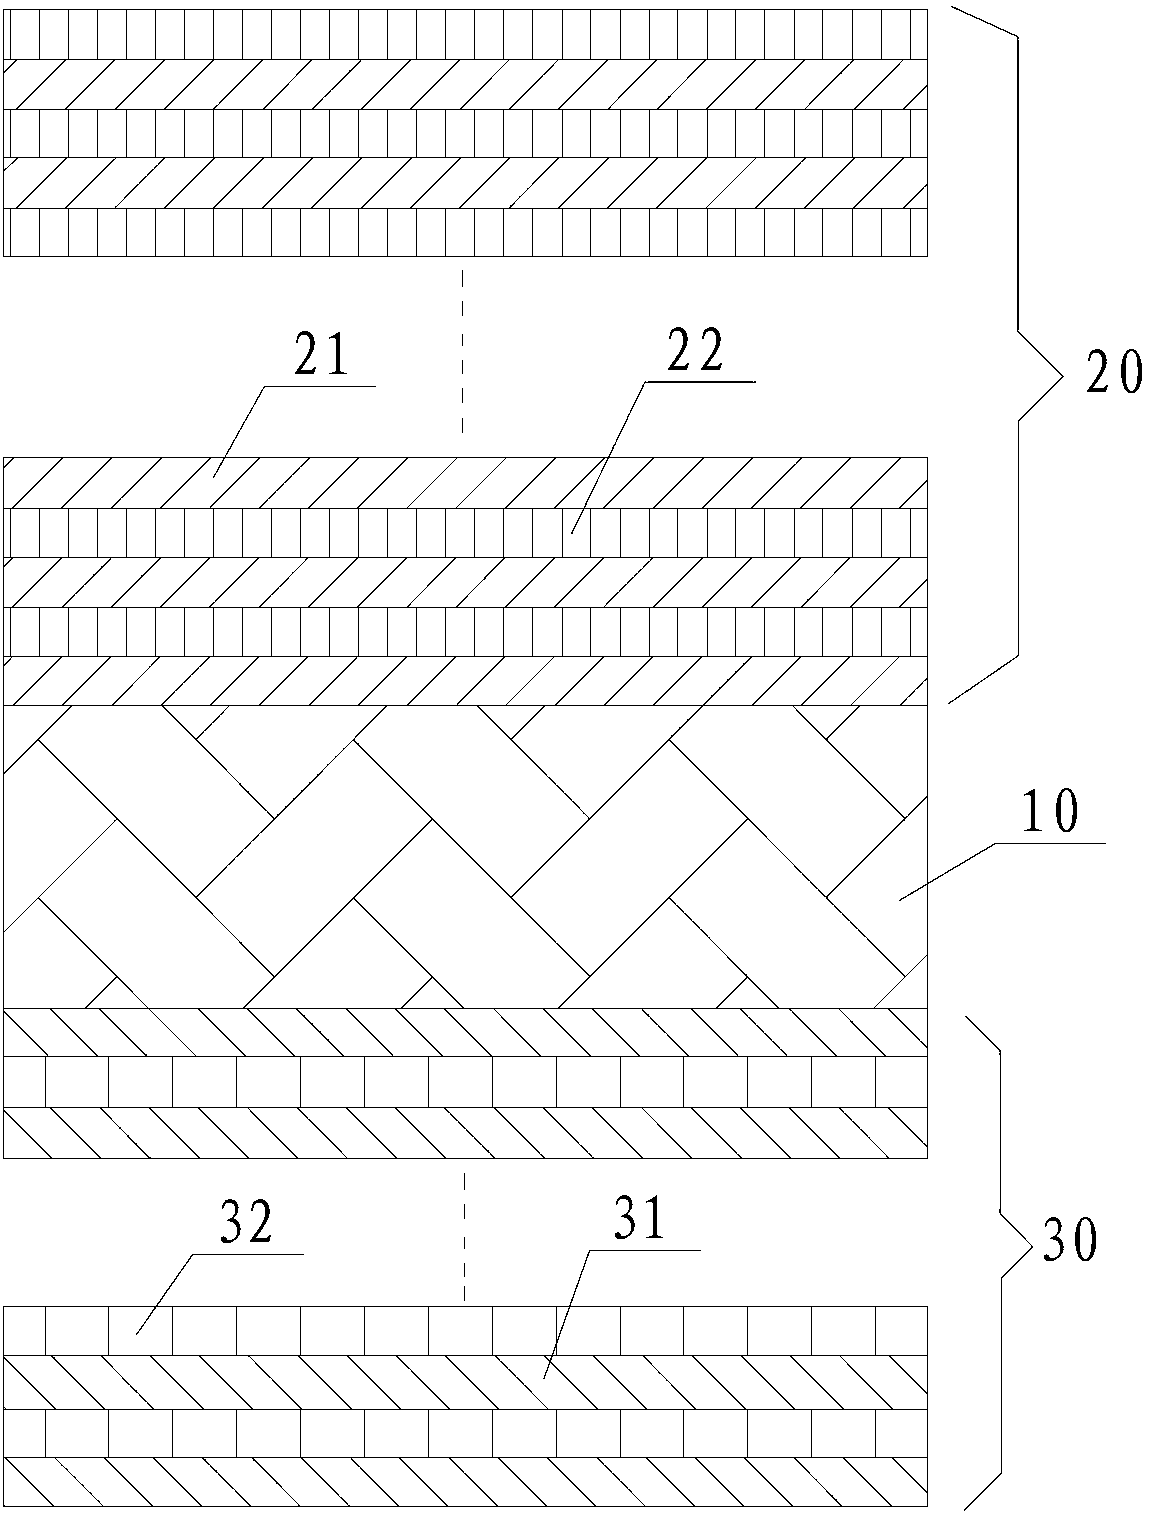 Near-infrared narrow-band optical filter used for somatosensory recognition system